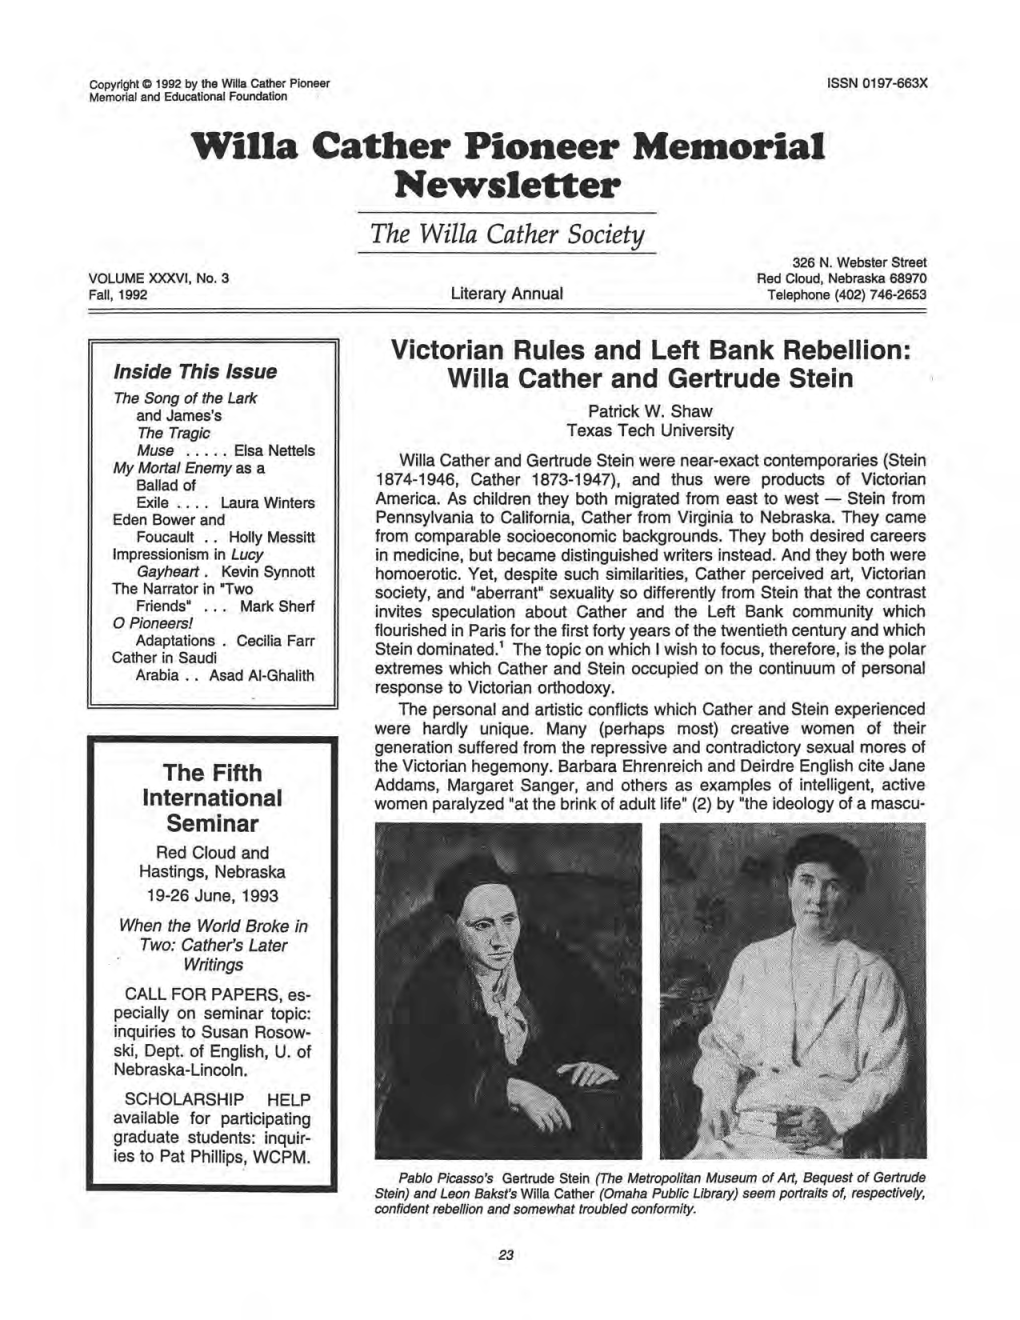 Willa Cather Pioneer Memorial Newsletter the Witla Cather Society 326 N